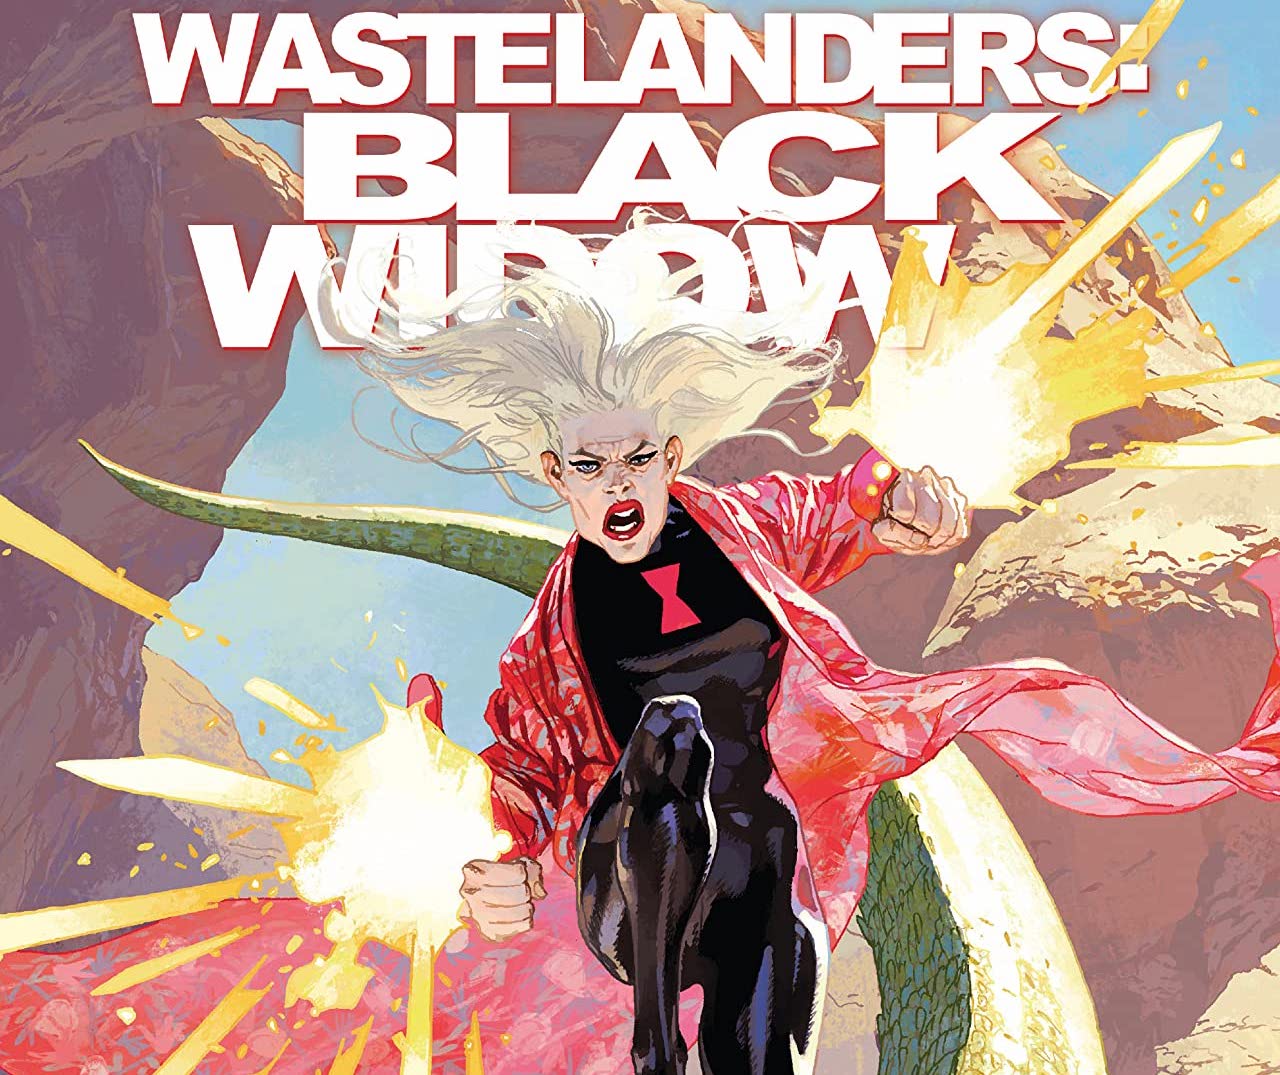 'Wastelanders: Black Widow' #1 is a tragic tale of a hero who never gives up